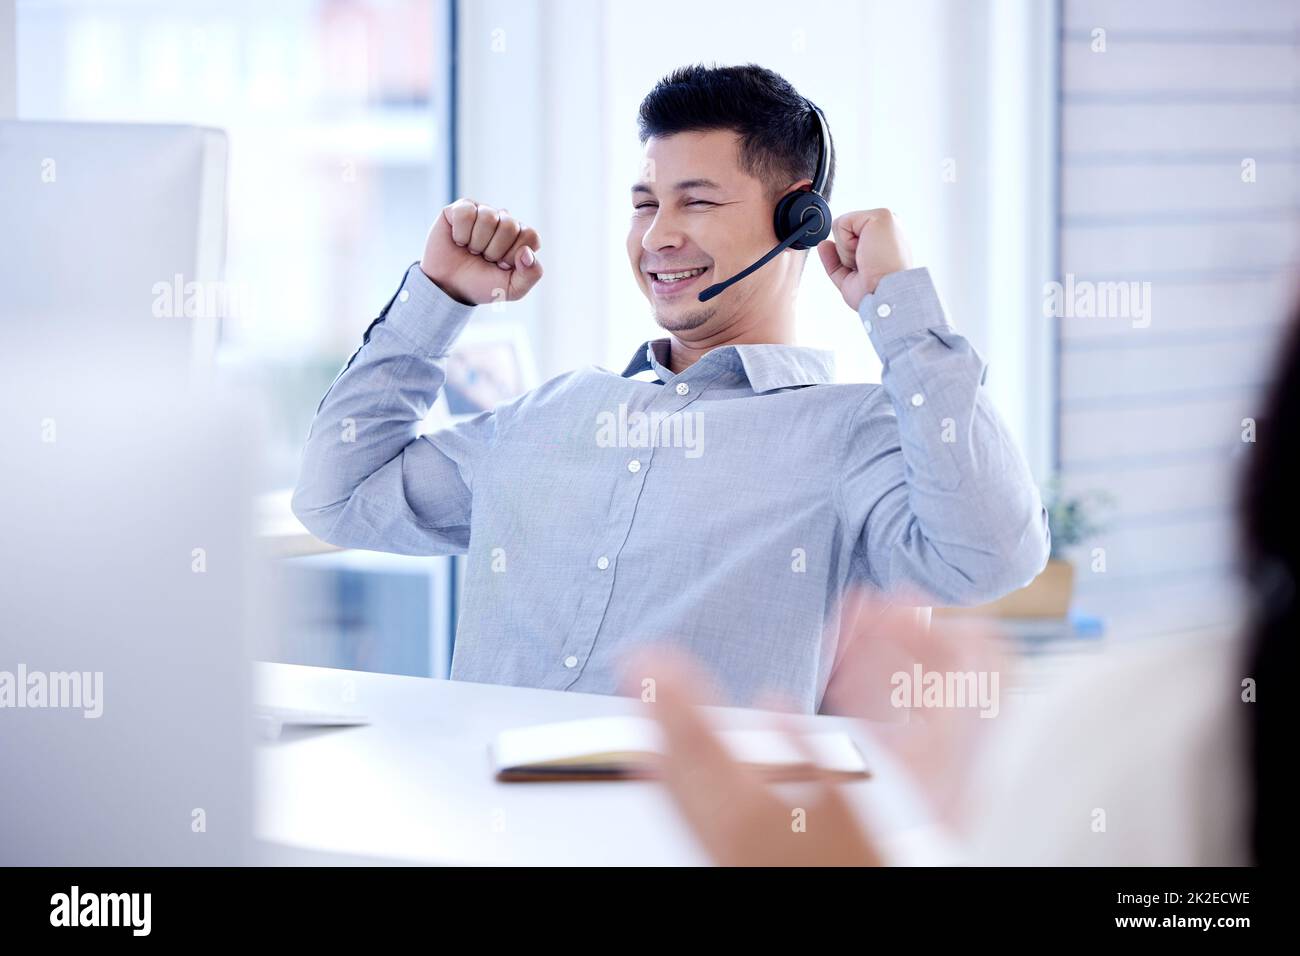 Another big sale made by me. Shot of a young call centre agent cheering while working on a computer in an office. Stock Photo